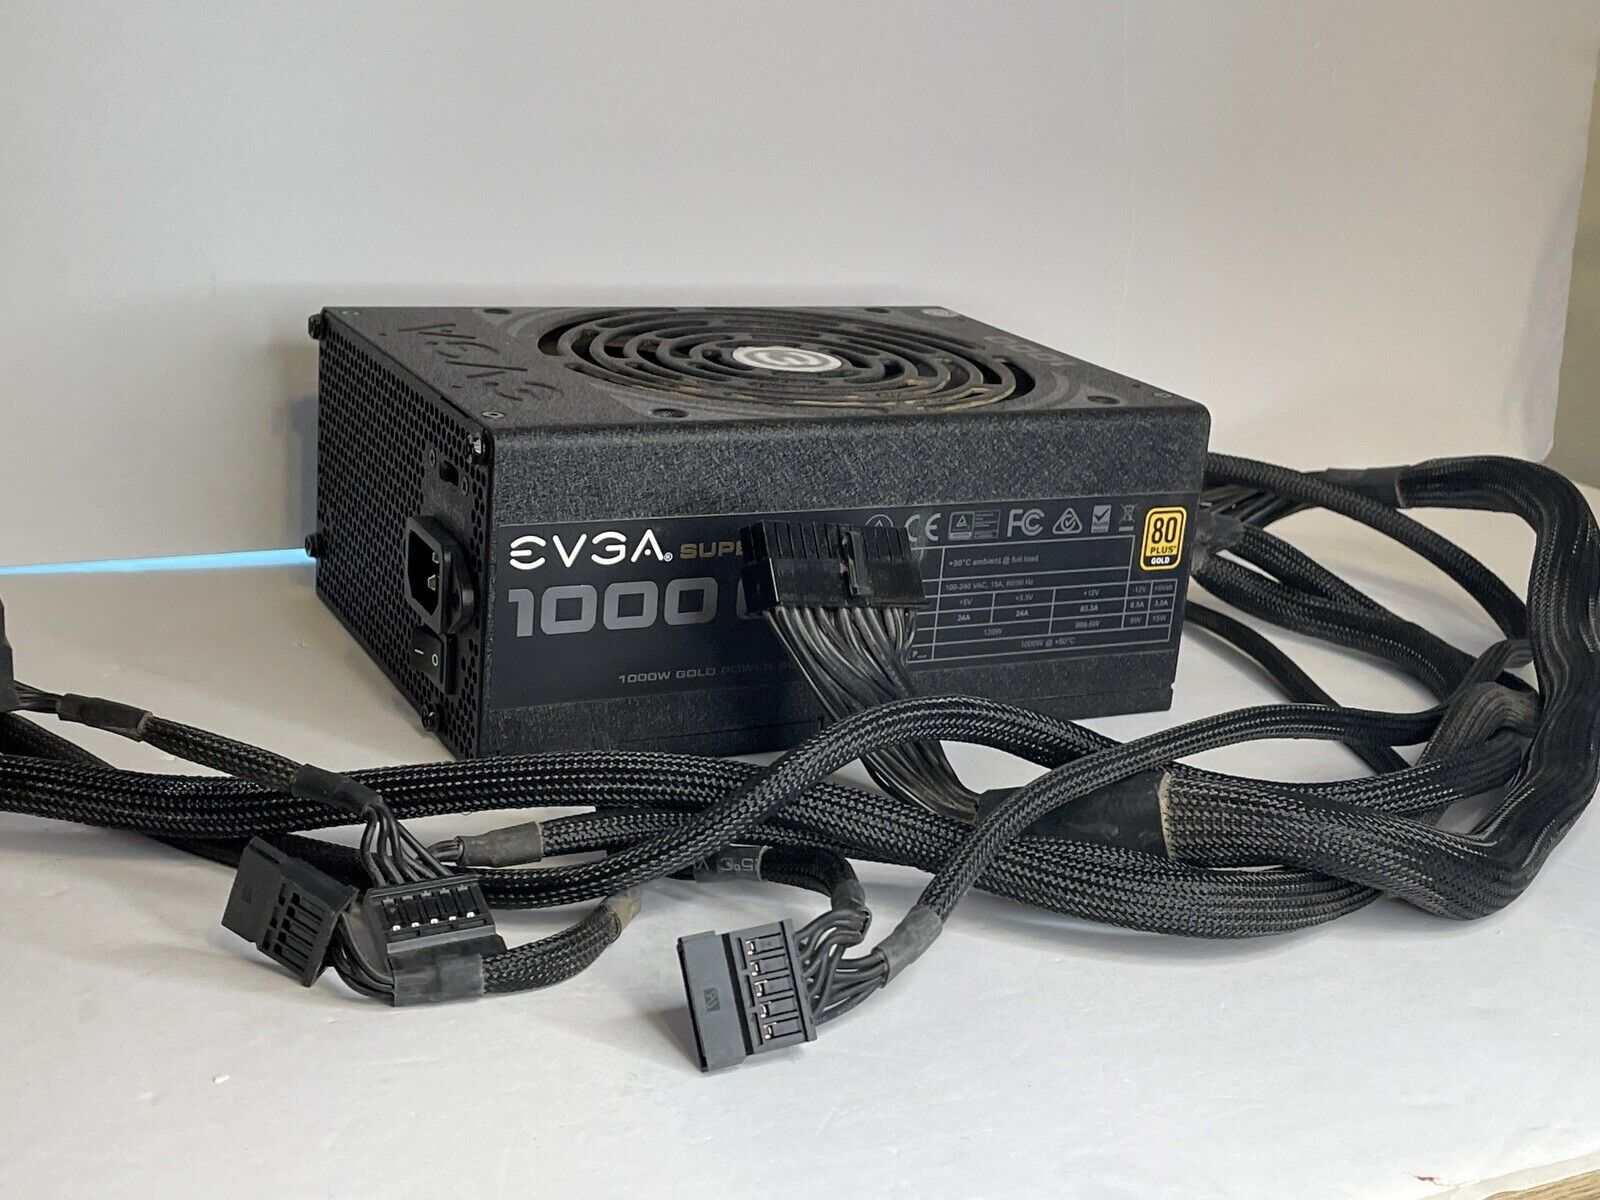 EVGA 120-G2-1000 SuperNOVA 80Plus Gold 1000W Power Supply with cables